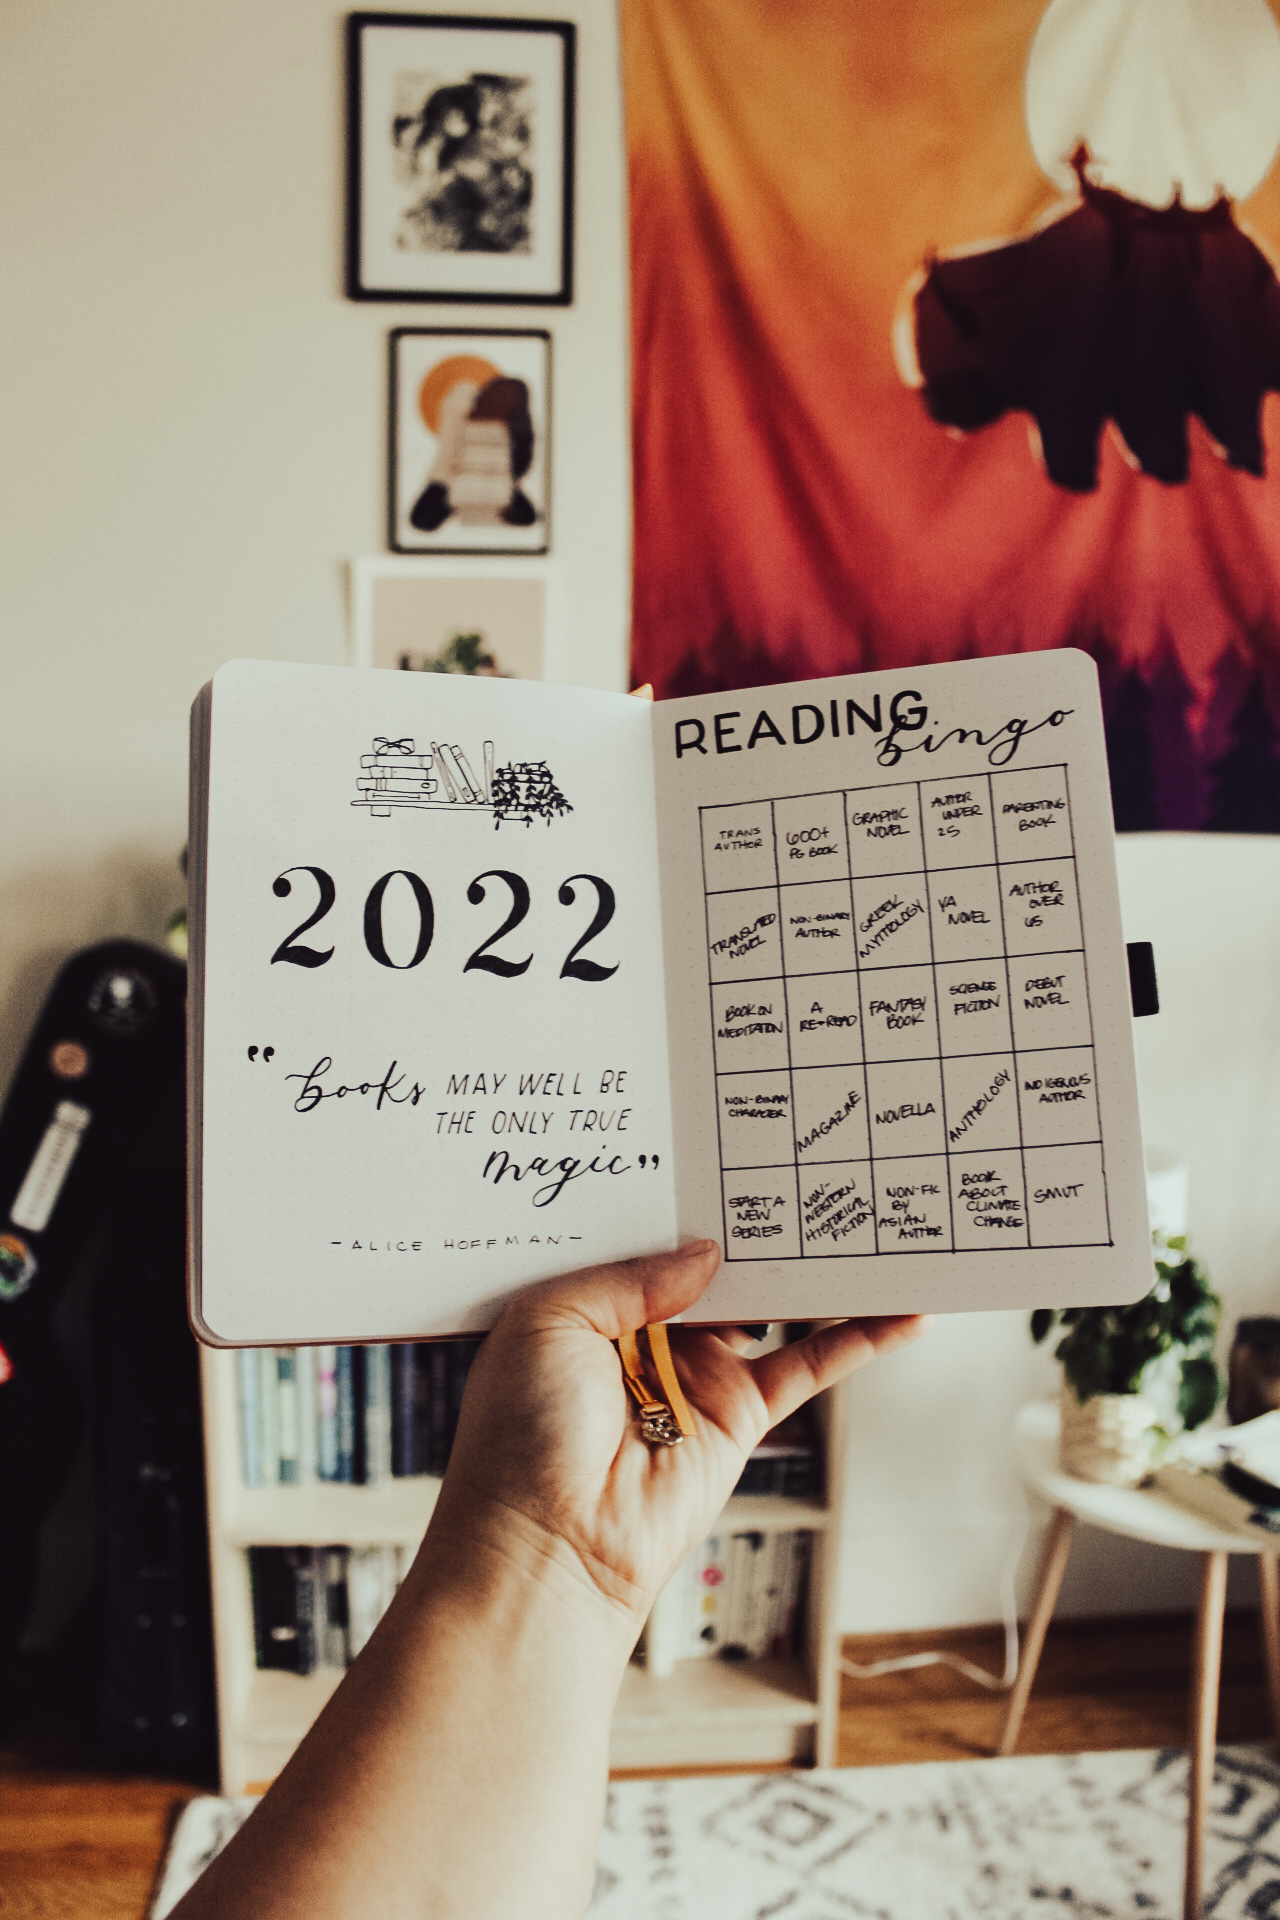 BOOKISH BULLET JOURNAL: SET UP & SPREADS